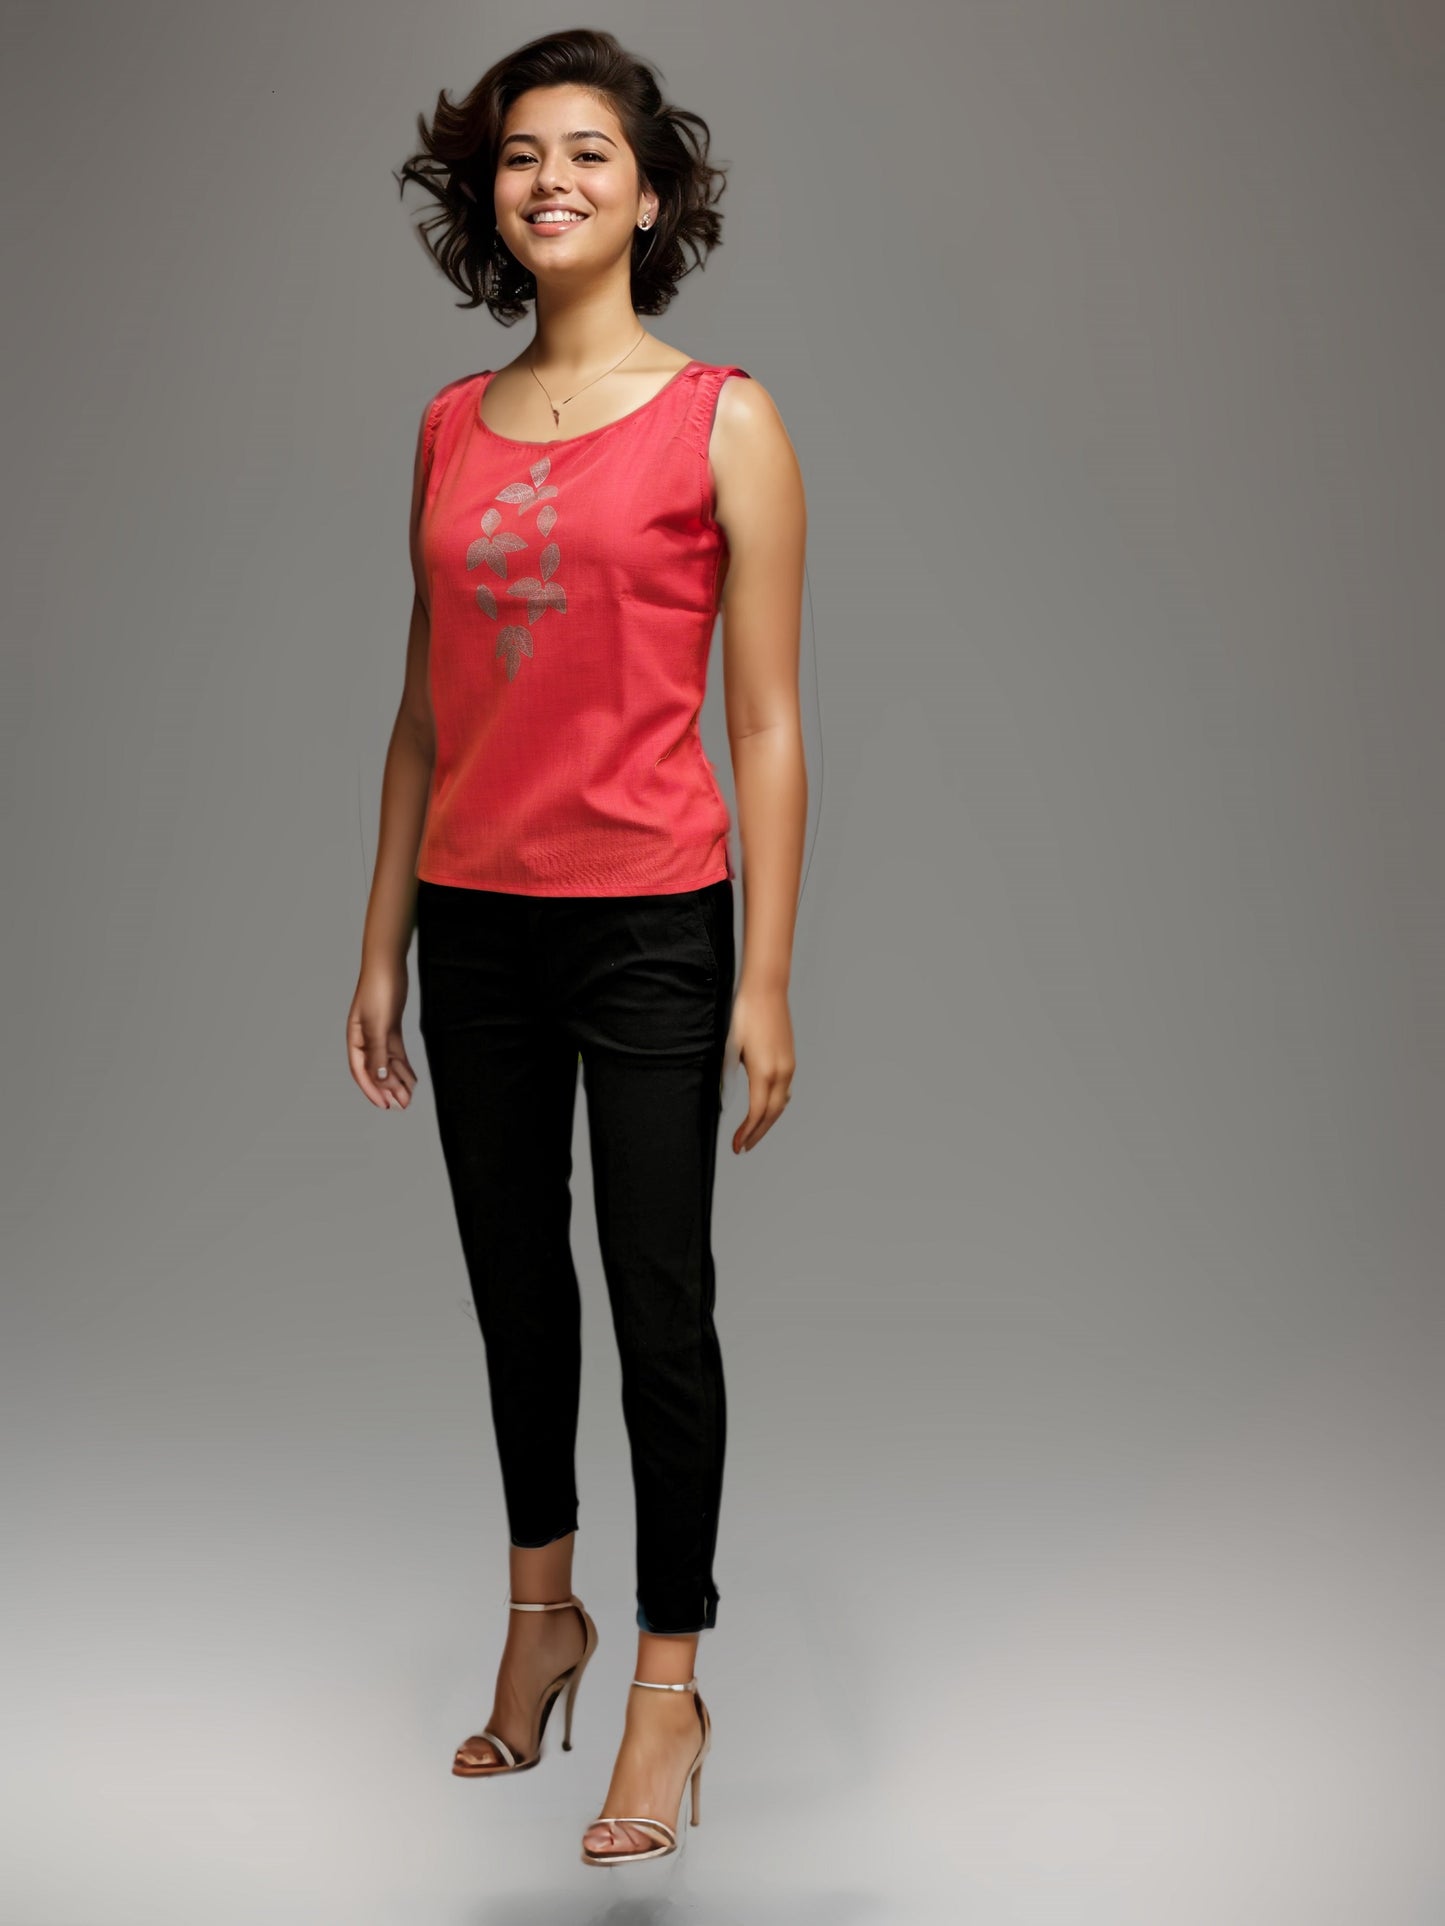 Aabandh's Sleevless Top - Parn ( Ruby Cotton )